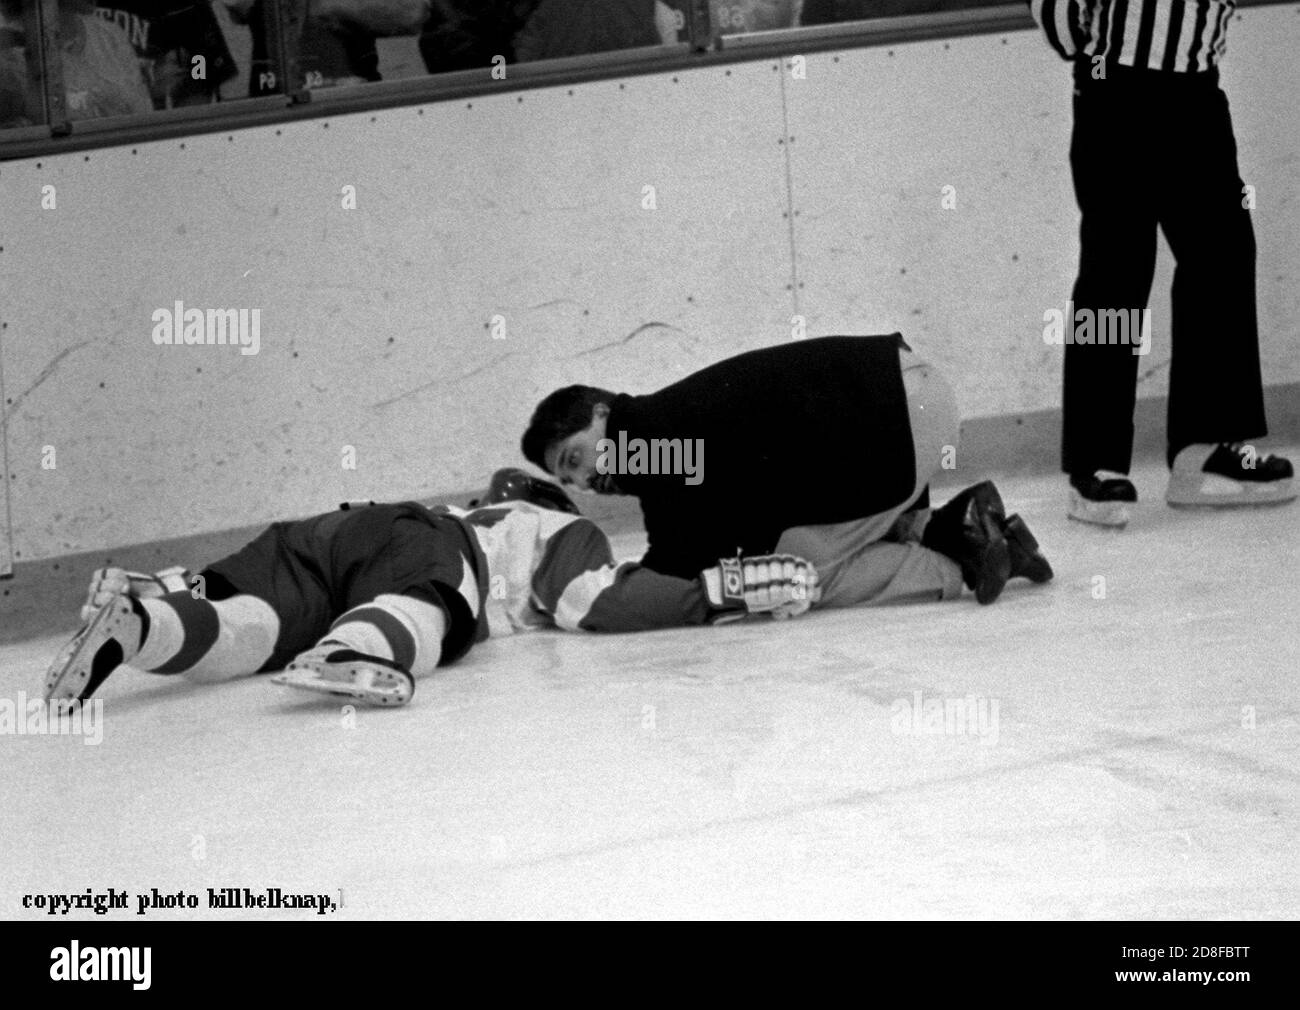 Exclusive images of Injured Boston University Hockey player Travis Roy is carried for by team doctor on the ice after after striking the boards. Roy was paralyized in the by the injury. Exclusive photo by Bill belknap Dec 16,1998 Stock Photo